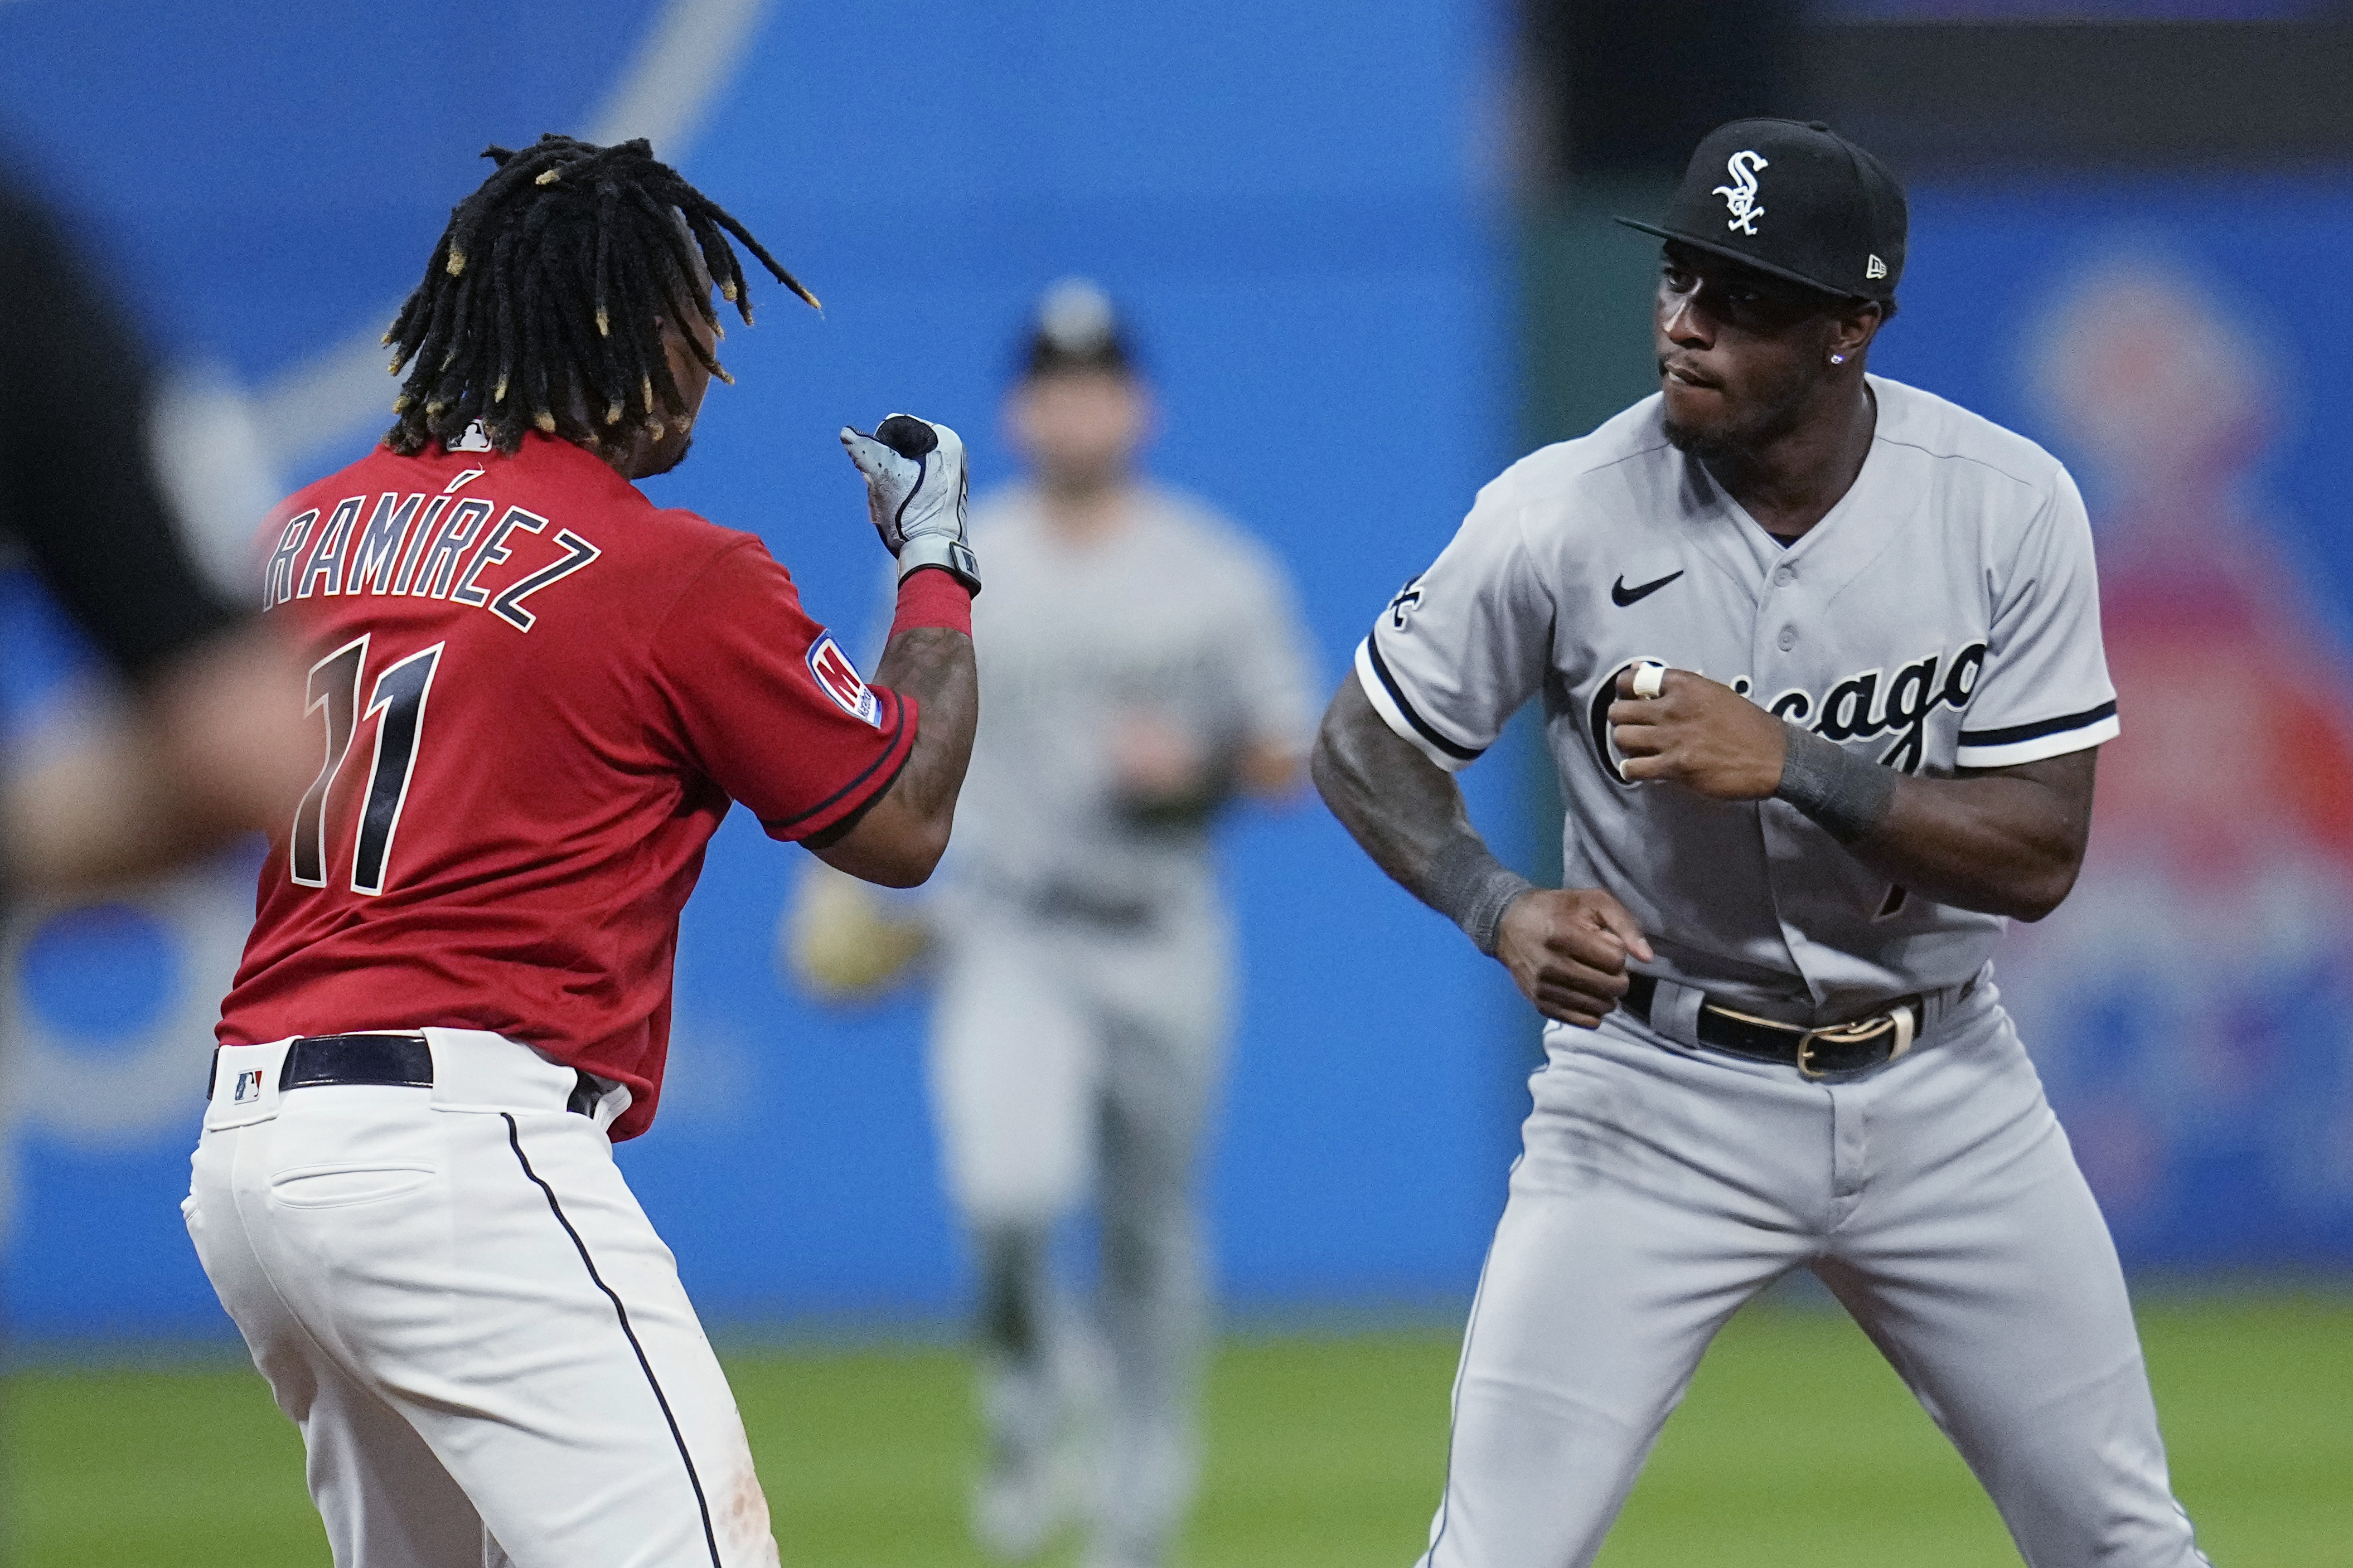 Social media reacts to José Ramírez, Tim Anderson fight during Guardians game